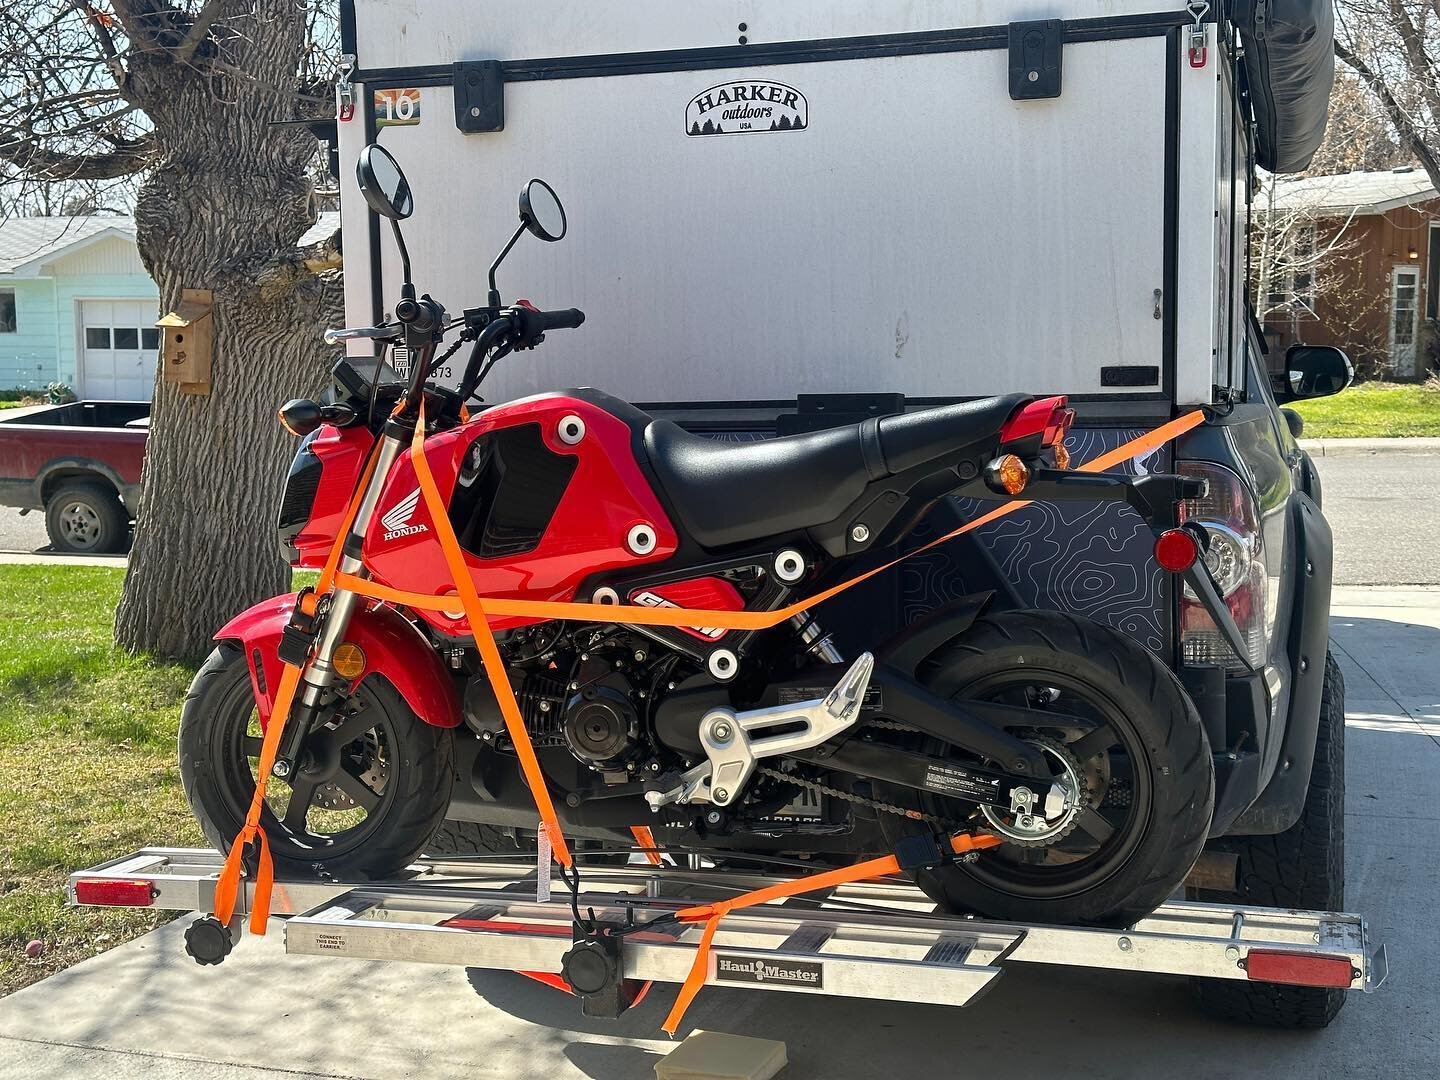 Loaded up and headed out. Say hi if you see me!!!

#wyoming #adventure #grom #gromsquad #getoutside #overland #adventurenthusiasts #outdooradventures #explorewyoming